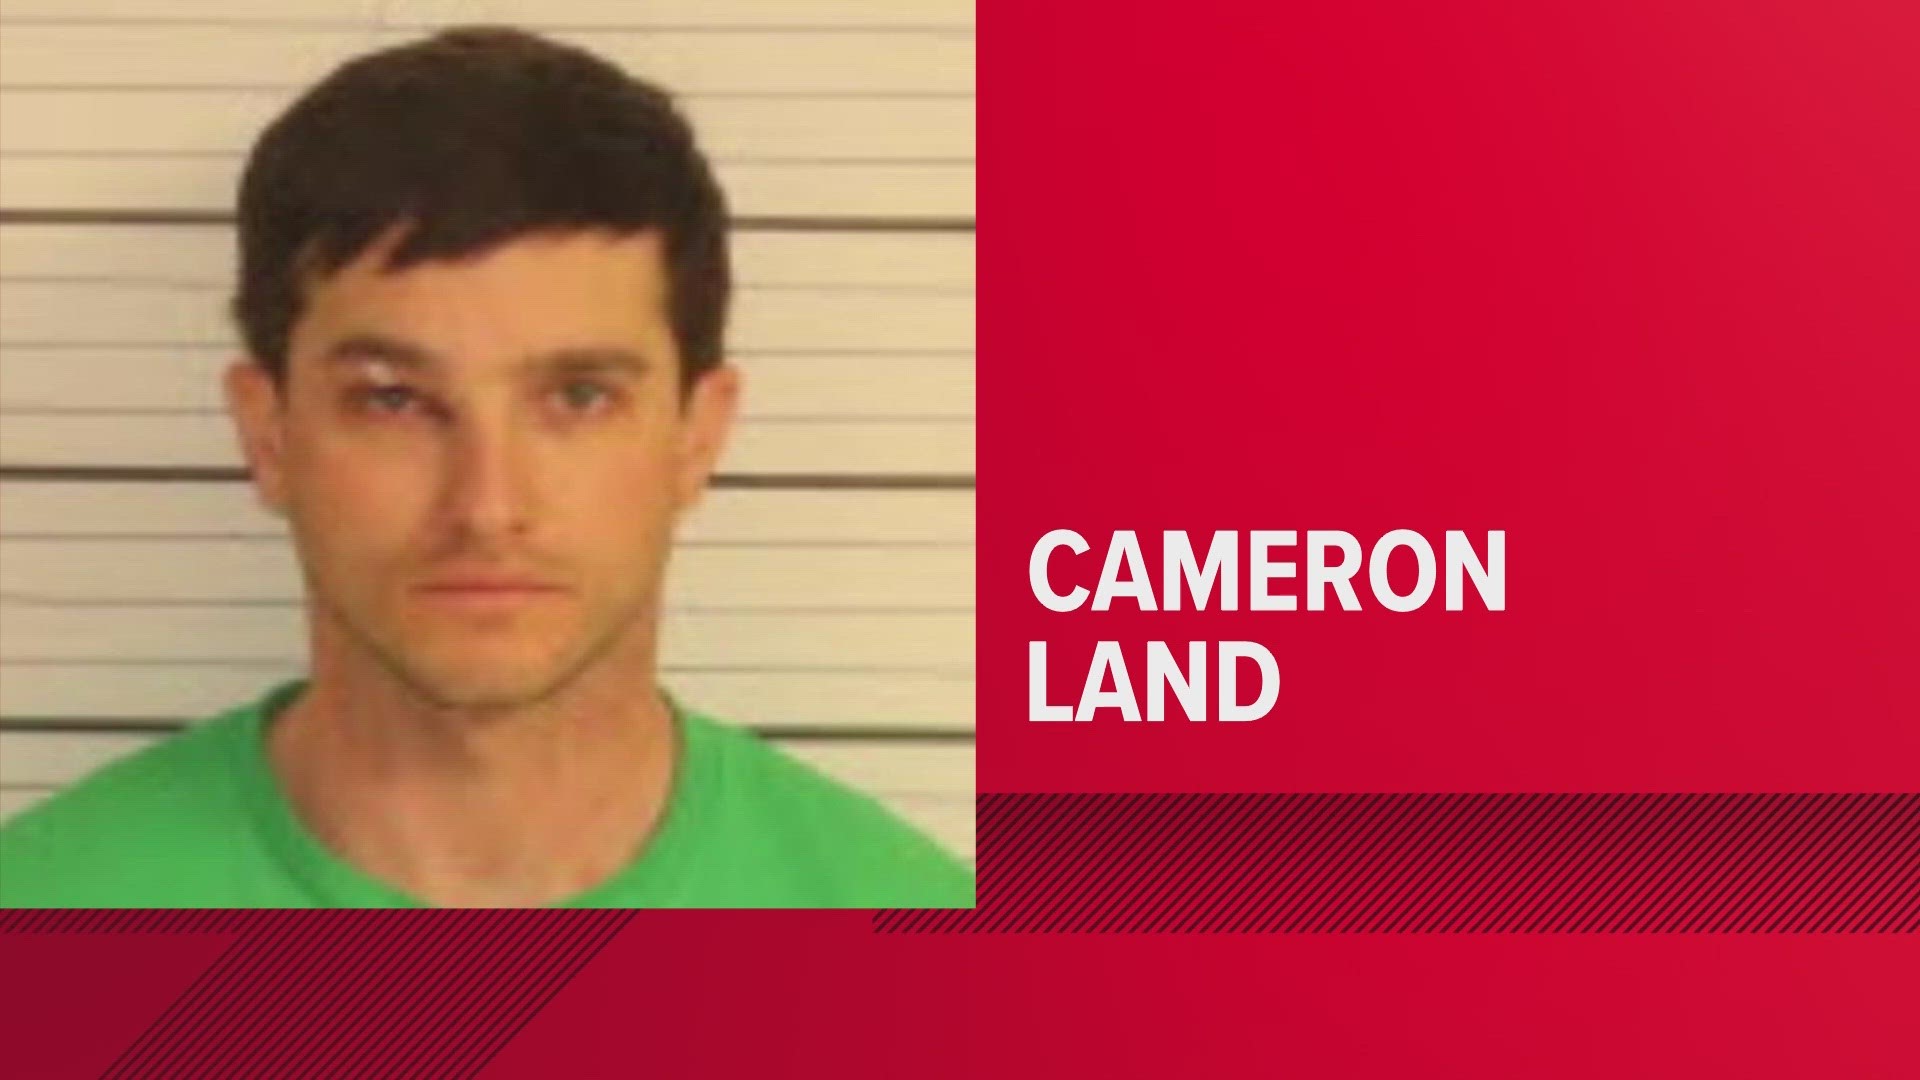 Cameron Land is charged with criminally negligent homicide and MFD said he has been relieved of duty pending the investigation.